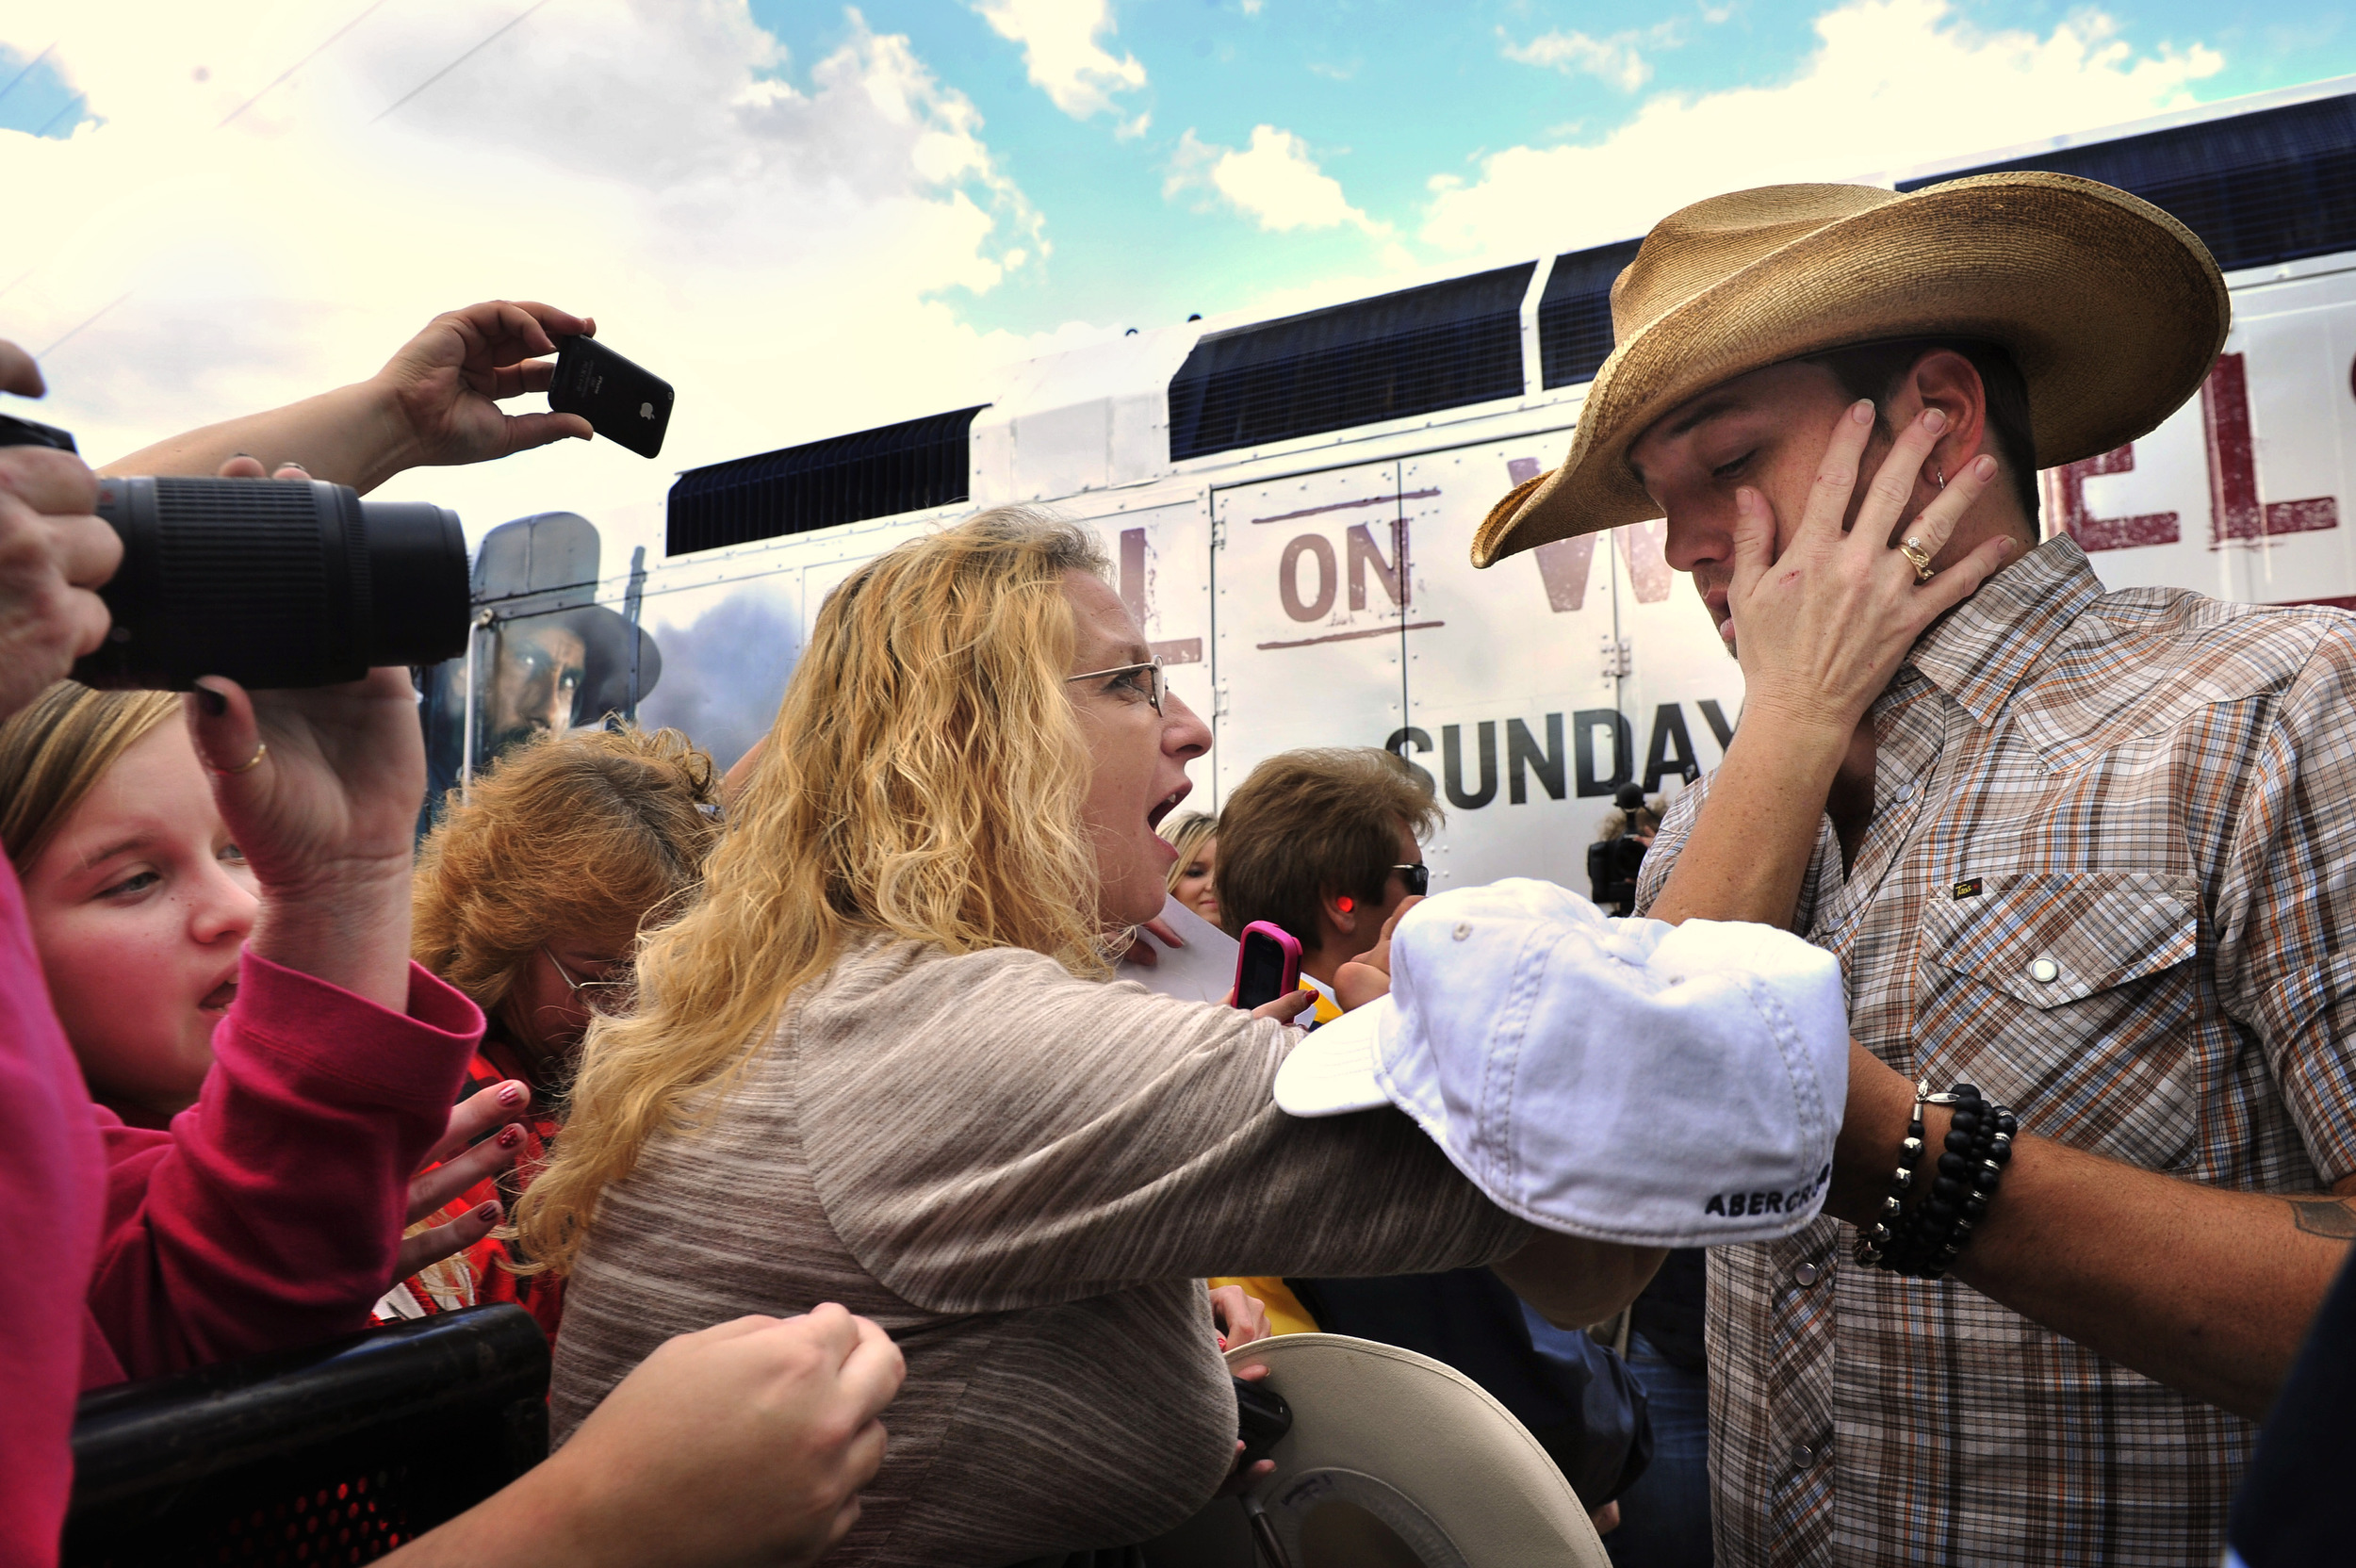  A fan touches Jason Aldean as he signs autographs for fans after a free concert at the riverfront downtown in Nashville, Tenn.  